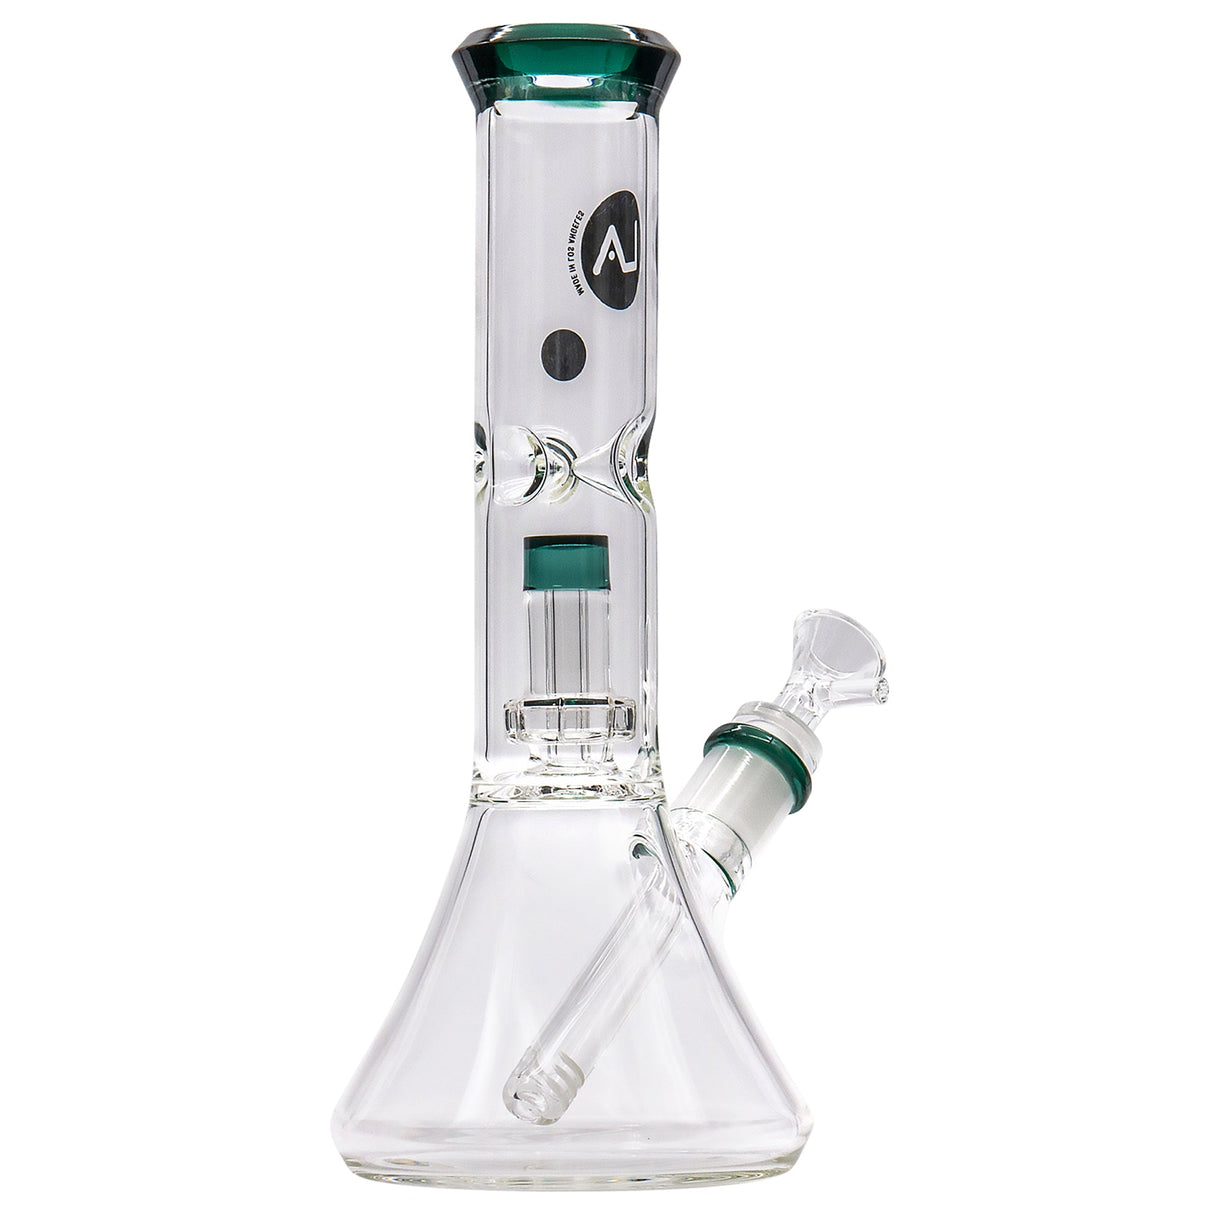 LA Pipes "Vector" Beaker Bong with Shower-Head Perc, 11" Tall, Borosilicate Glass, Front View